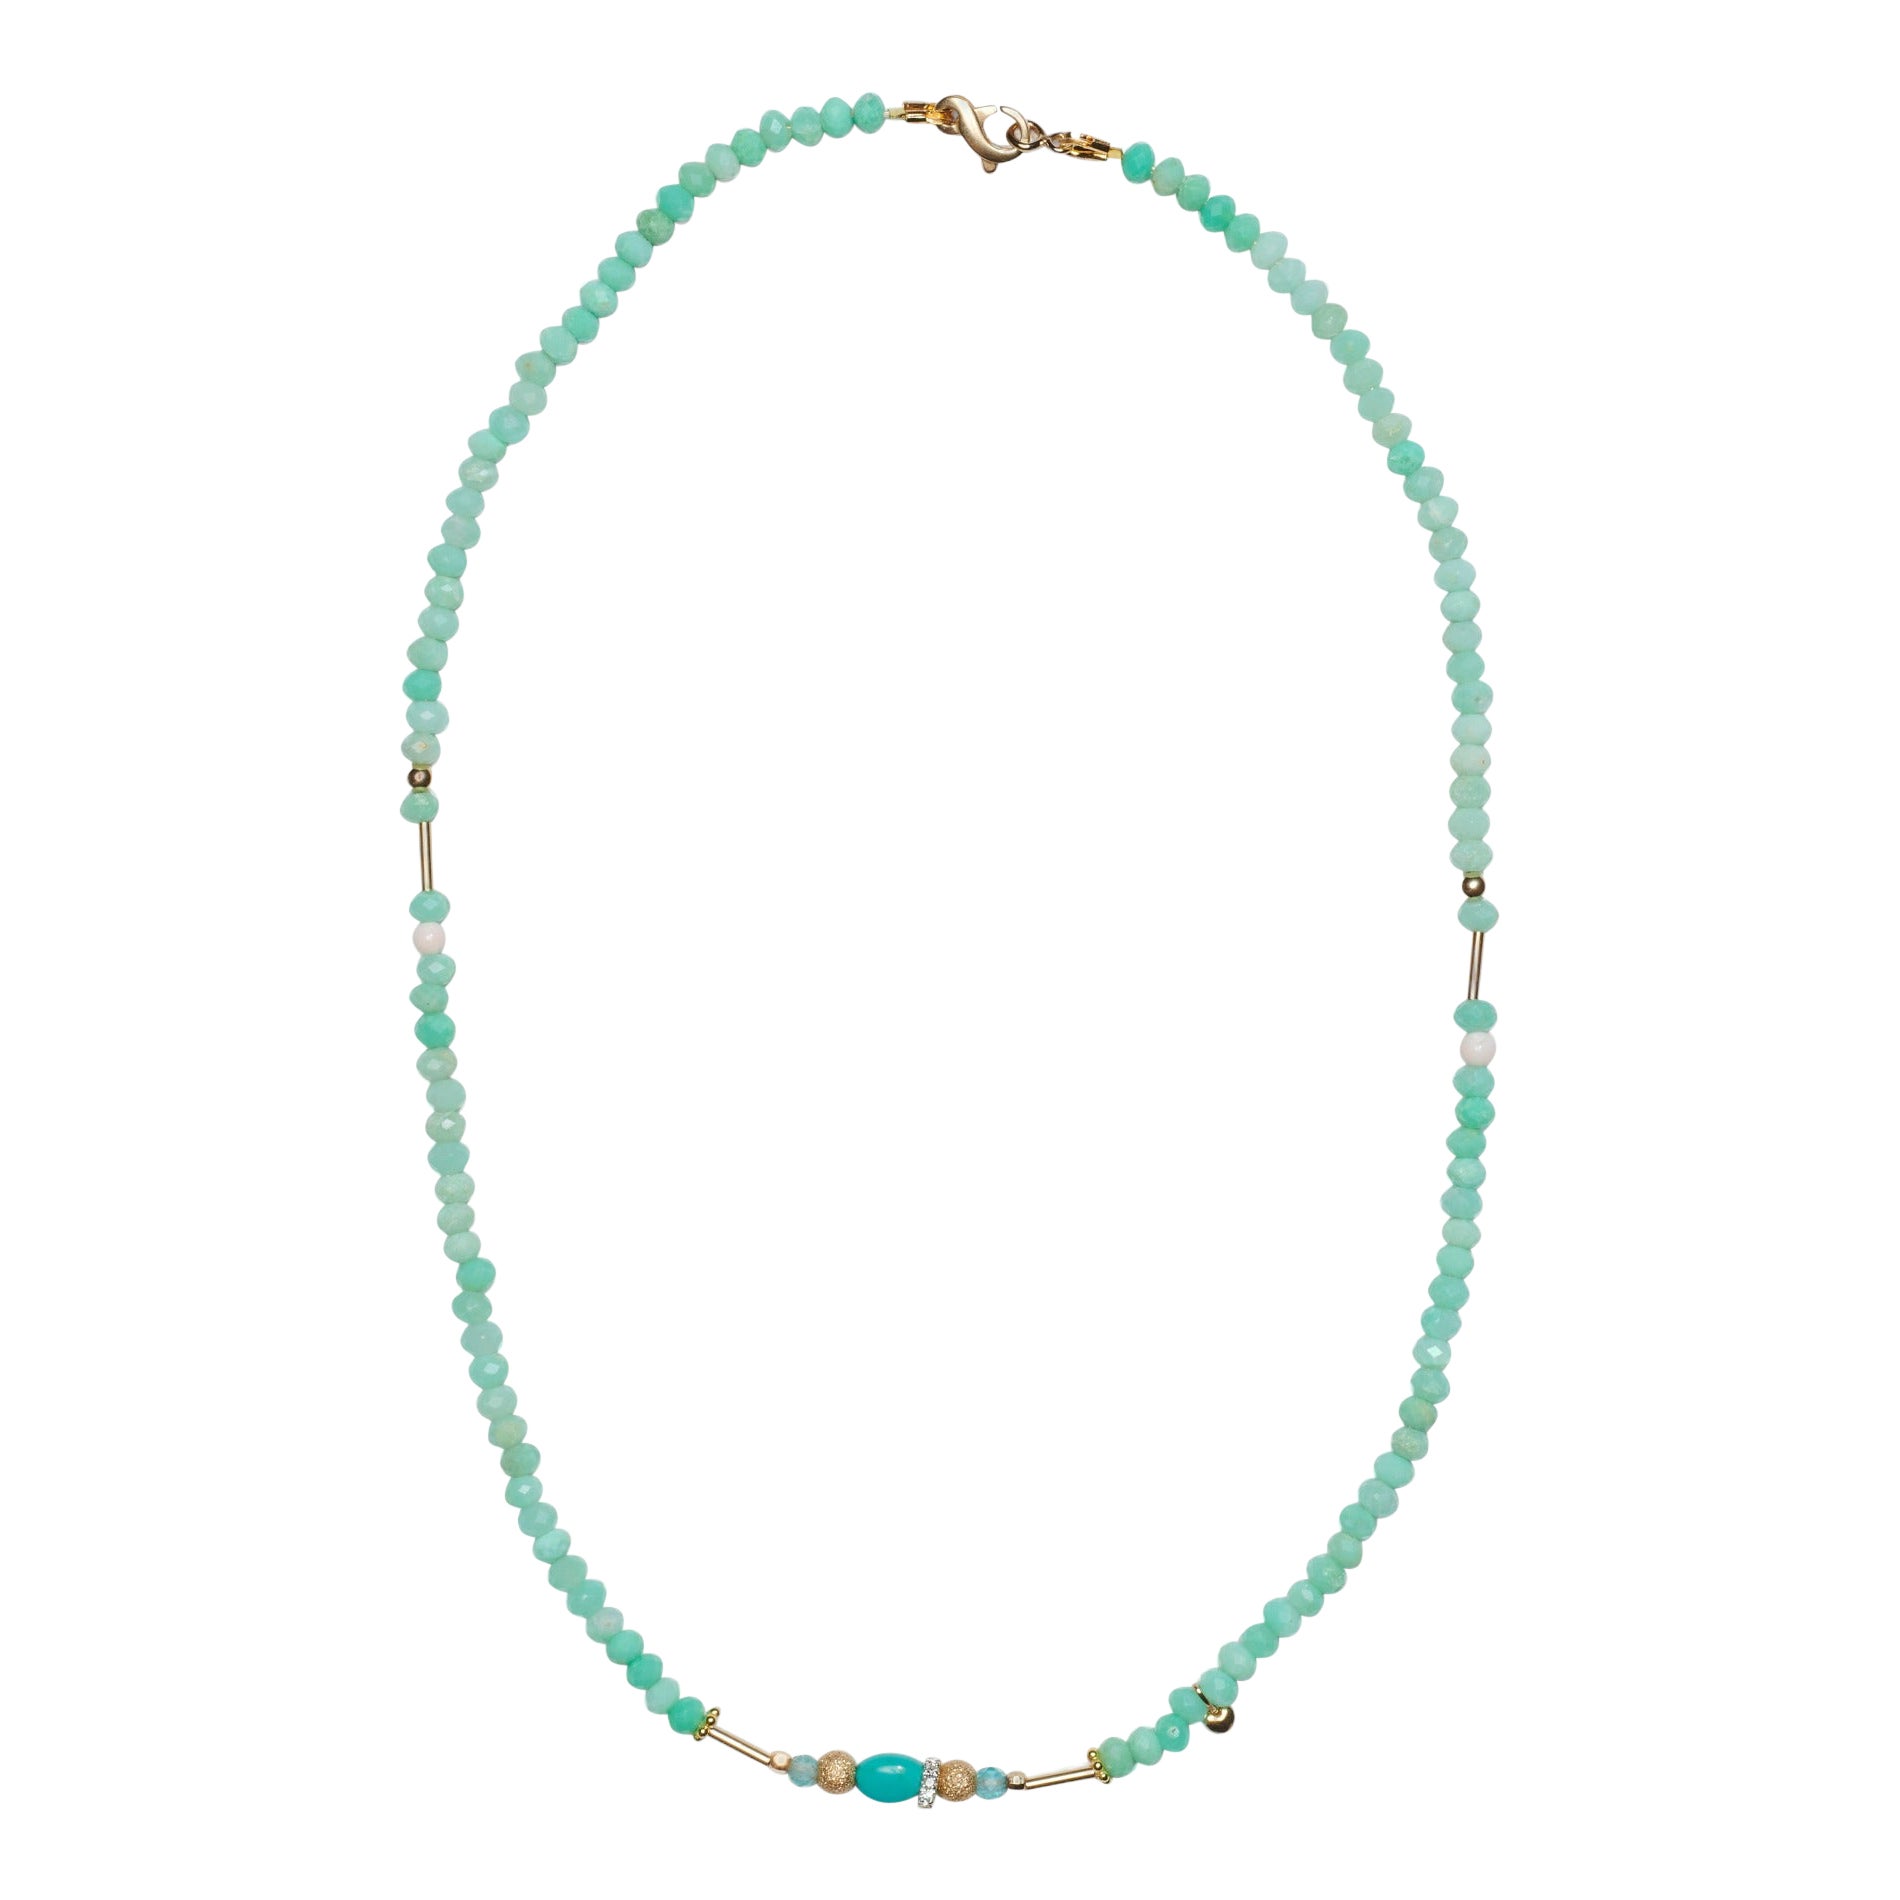 Australian Chrysoprase Diamonds Beaded Necklace with Sleeping Beauty Turquoises For Sale